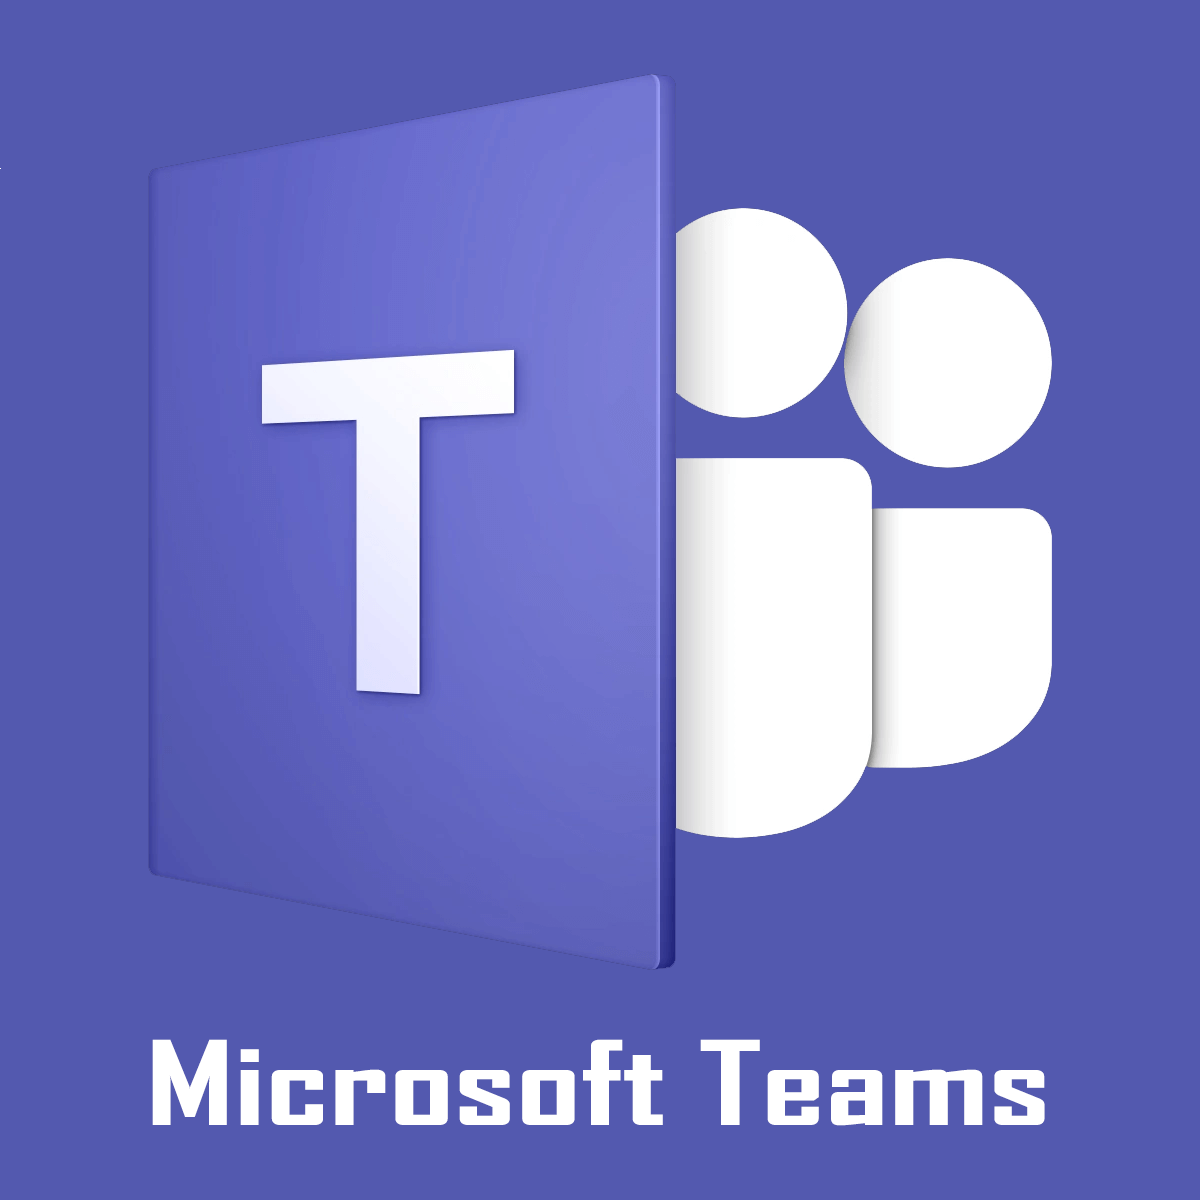 how to download microsoft teams background images